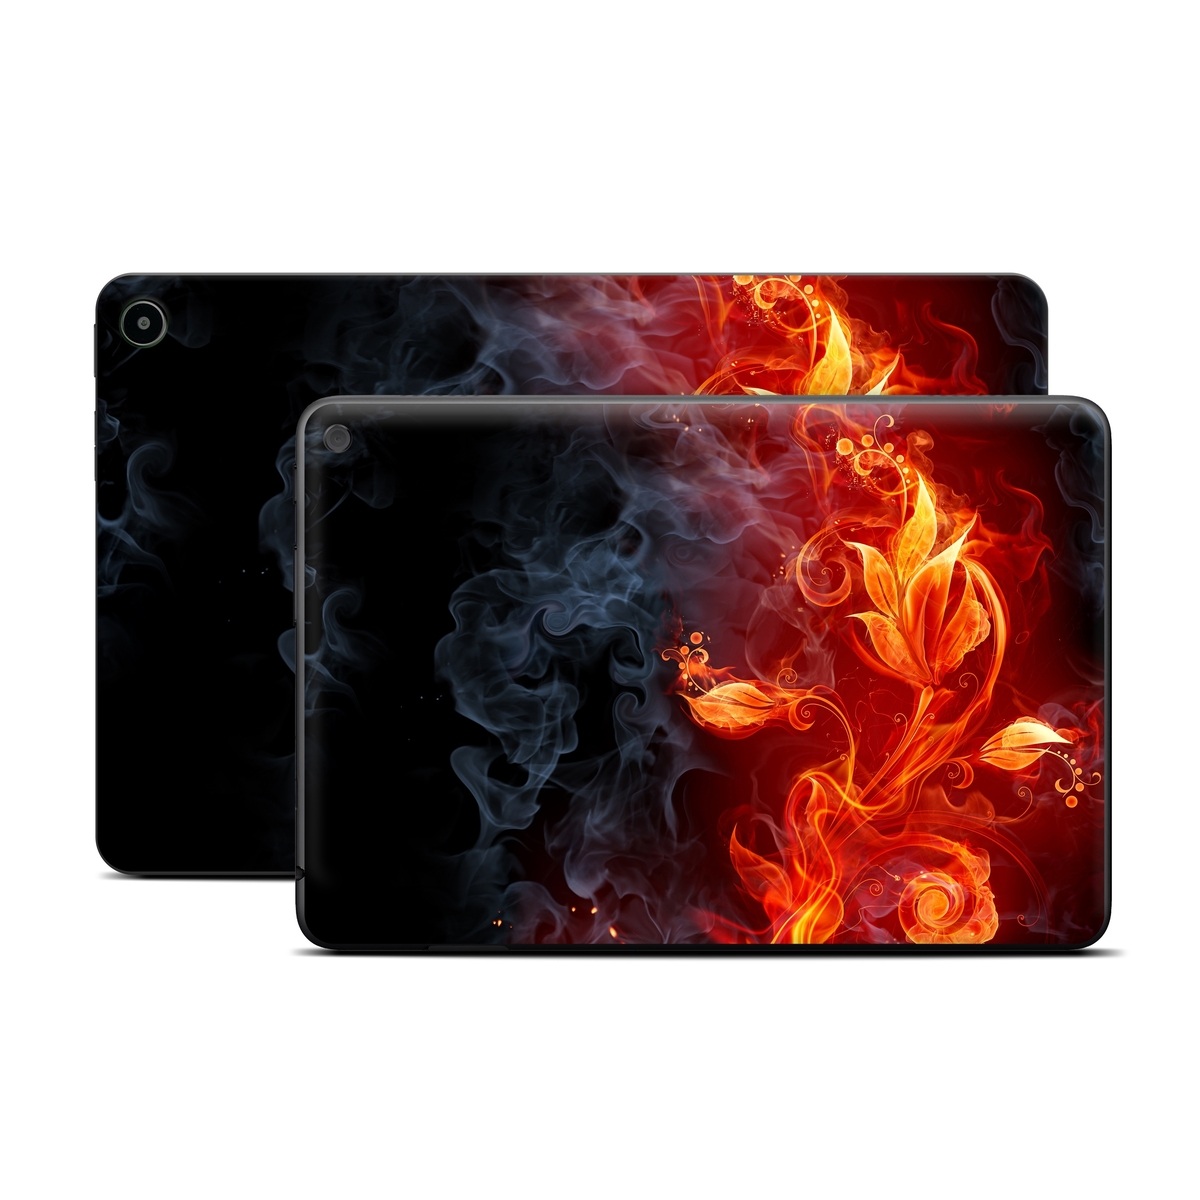 Amazon Fire Tablet Series Skin Skin design of Flame, Fire, Heat, Red, Orange, Fractal art, Graphic design, Geological phenomenon, Design, Organism, with black, red, orange colors